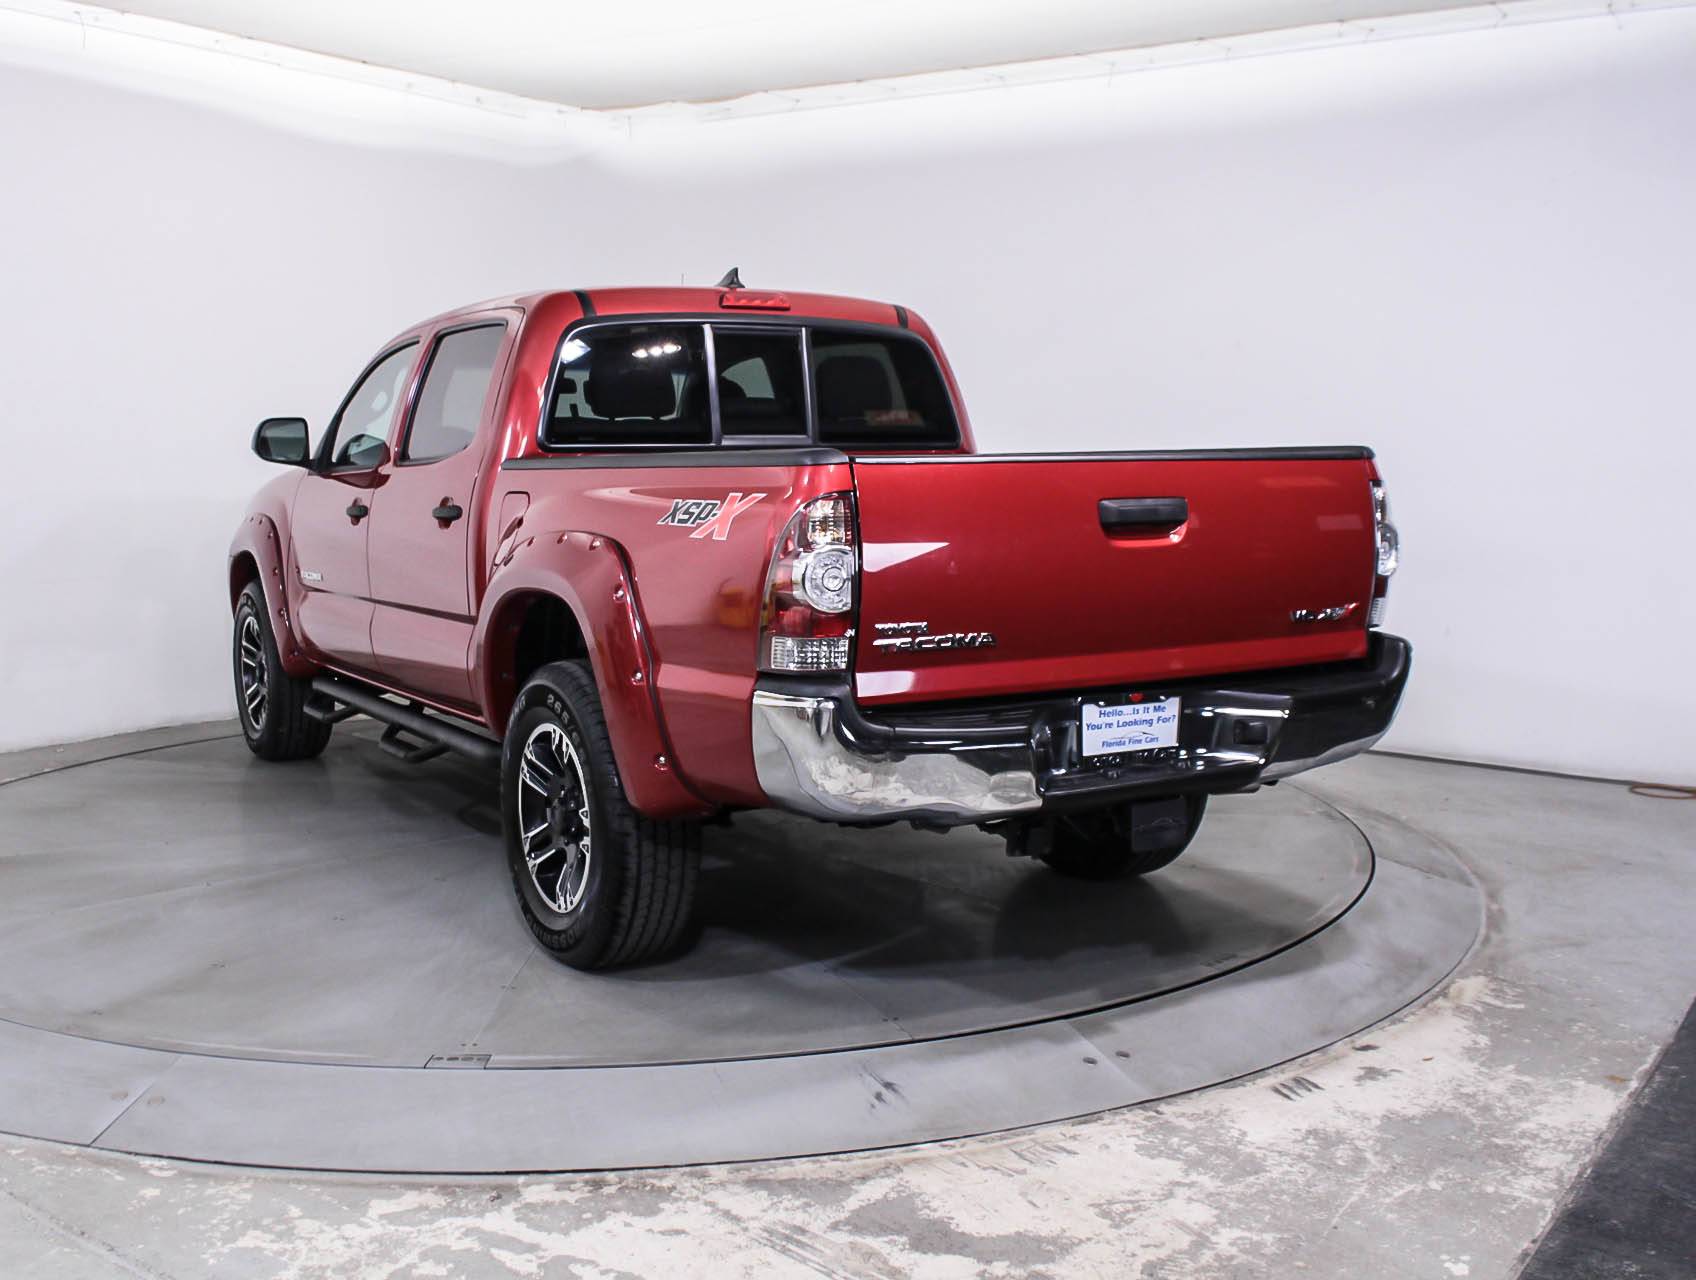 Used 2015 TOYOTA TACOMA Xsp-X Truck for sale in MIAMI, FL | 88128